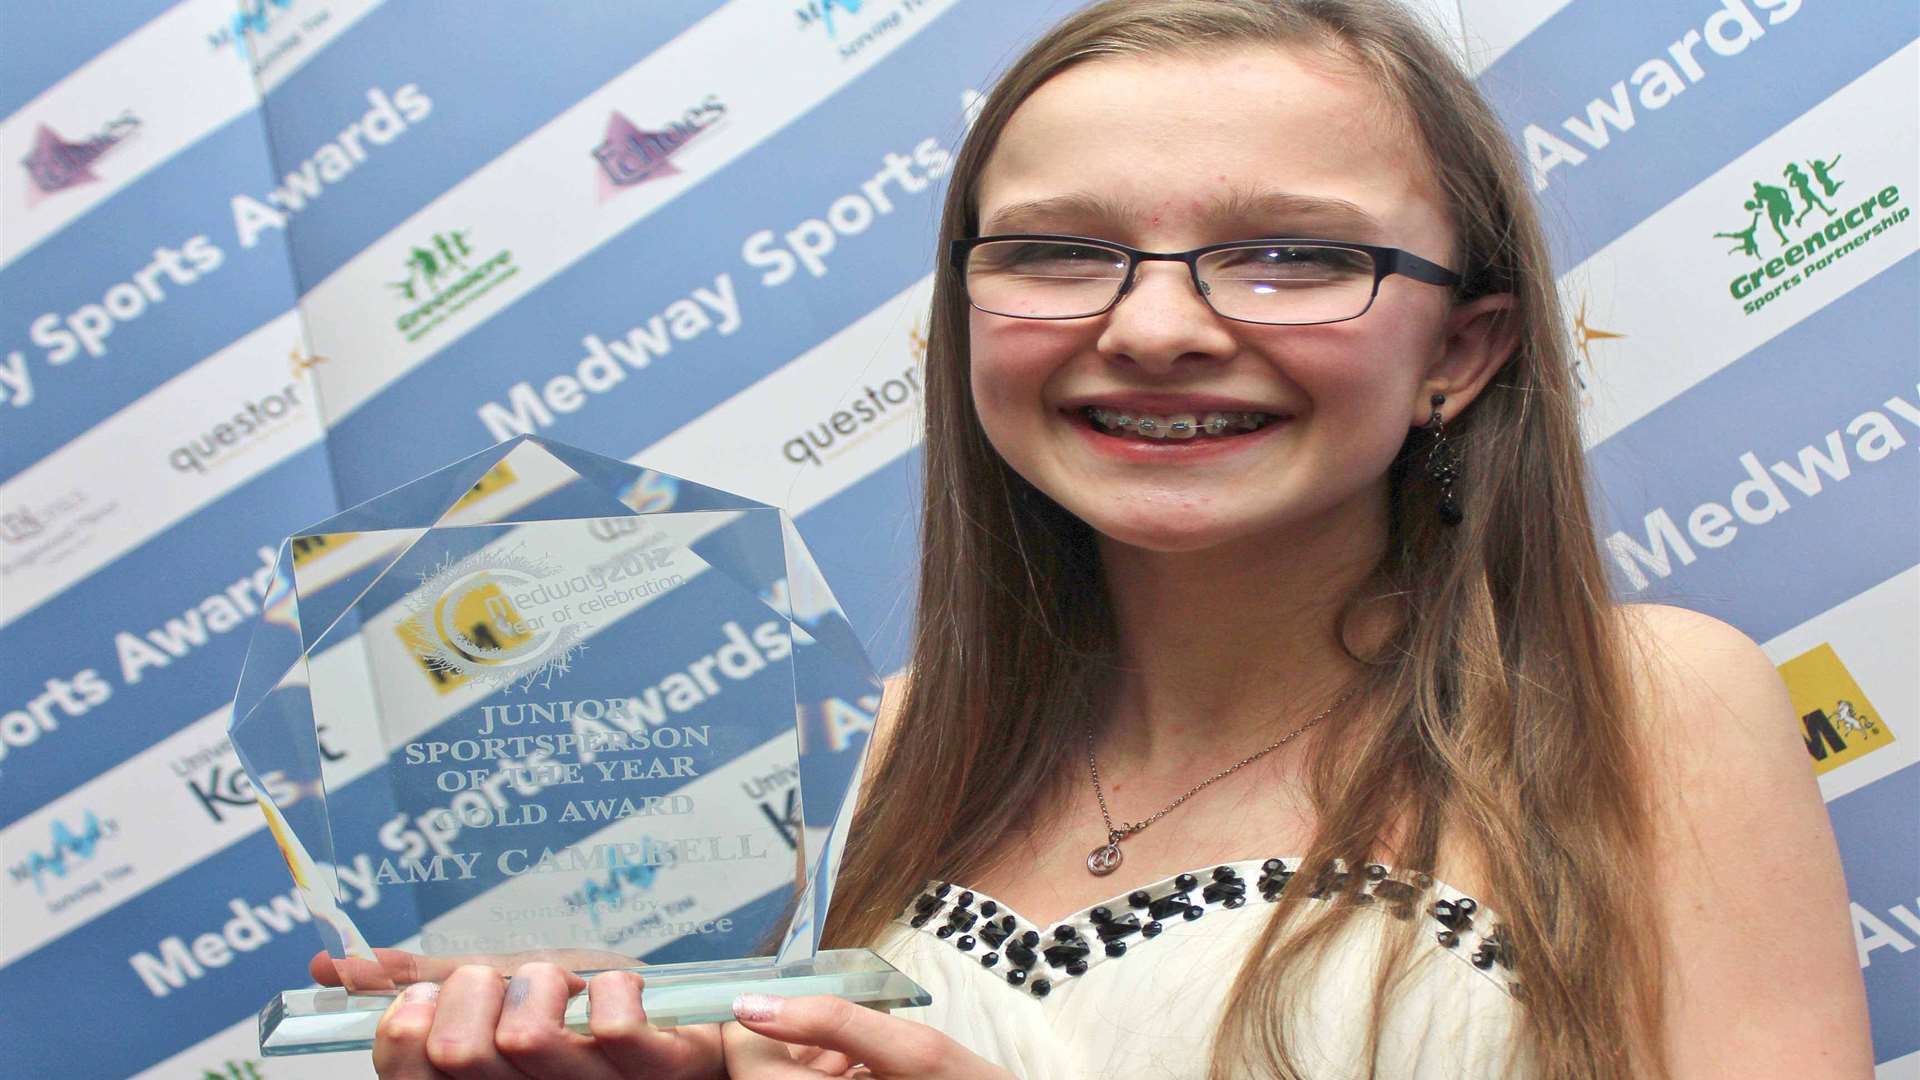 Junior Sportsperson of the Year 2012, Amy Campbell. Picture: Darren Small